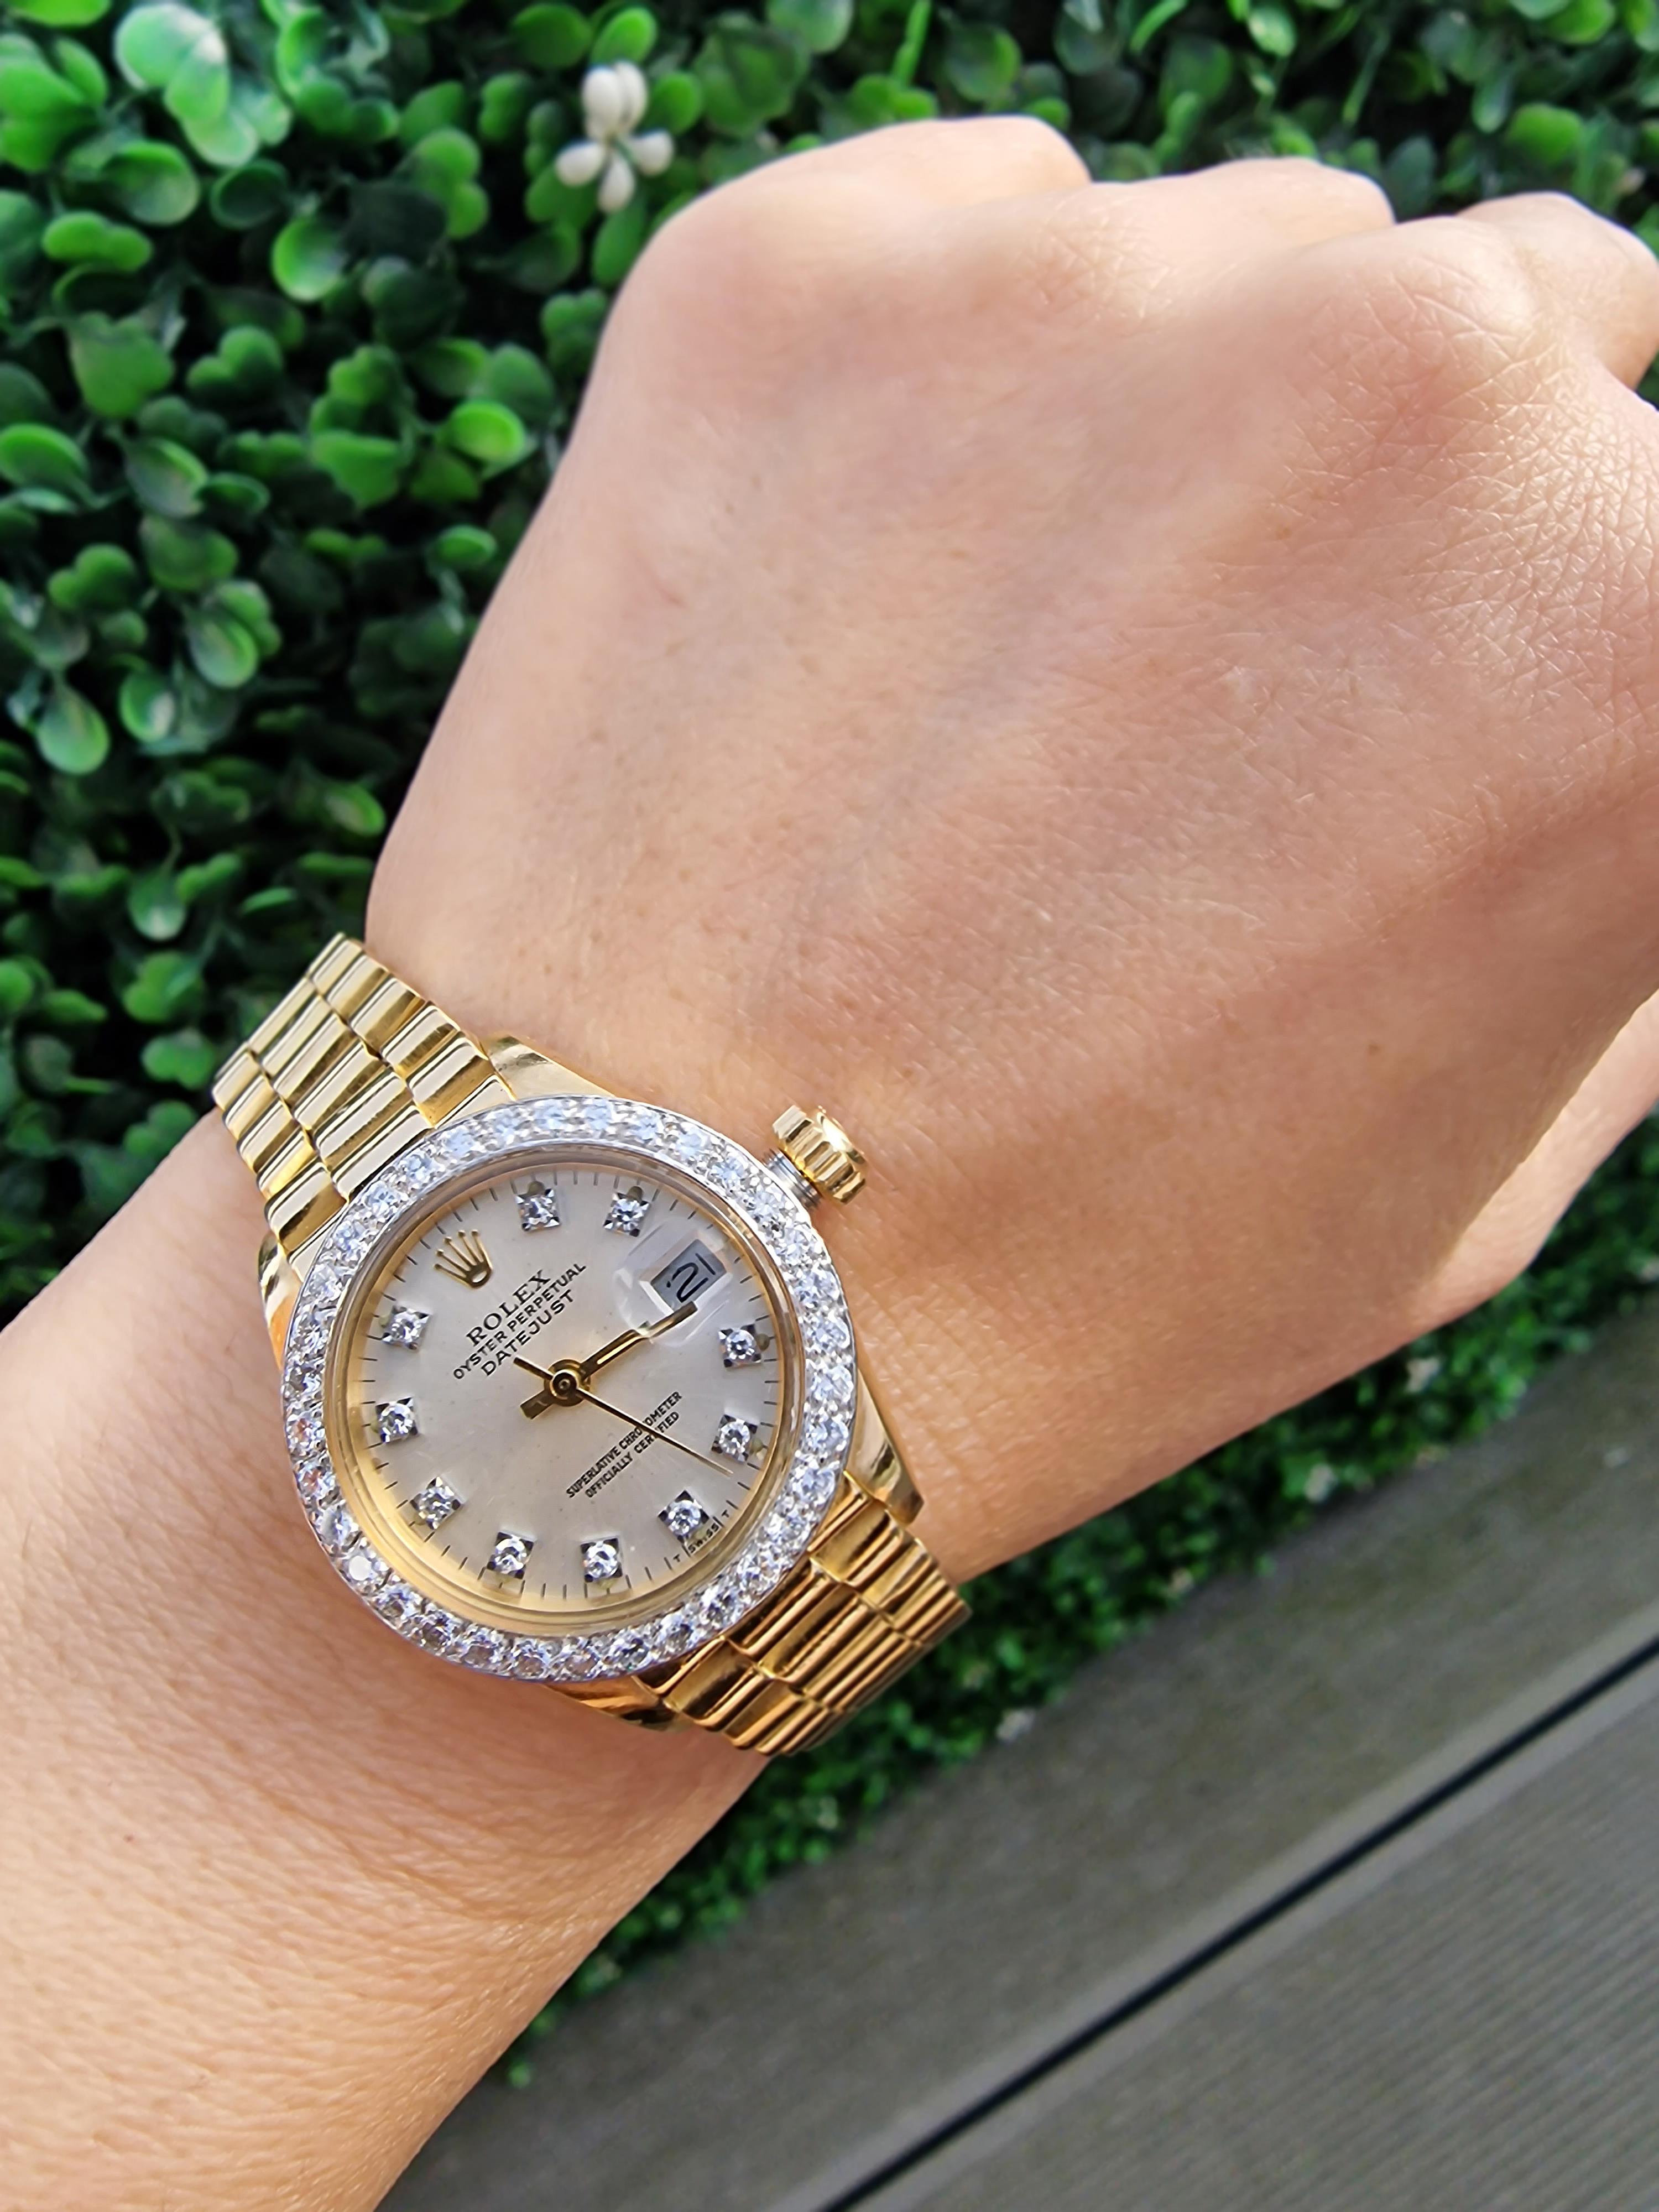 Collectable vintage 1979 ladies Rolex Datejust watch in 18ct yellow gold with after set diamond bezel.
The watch has been recently serviced prior to upload and is in full working order.

Length of bracelet: 17cms

Enjoy the luxury precision of the